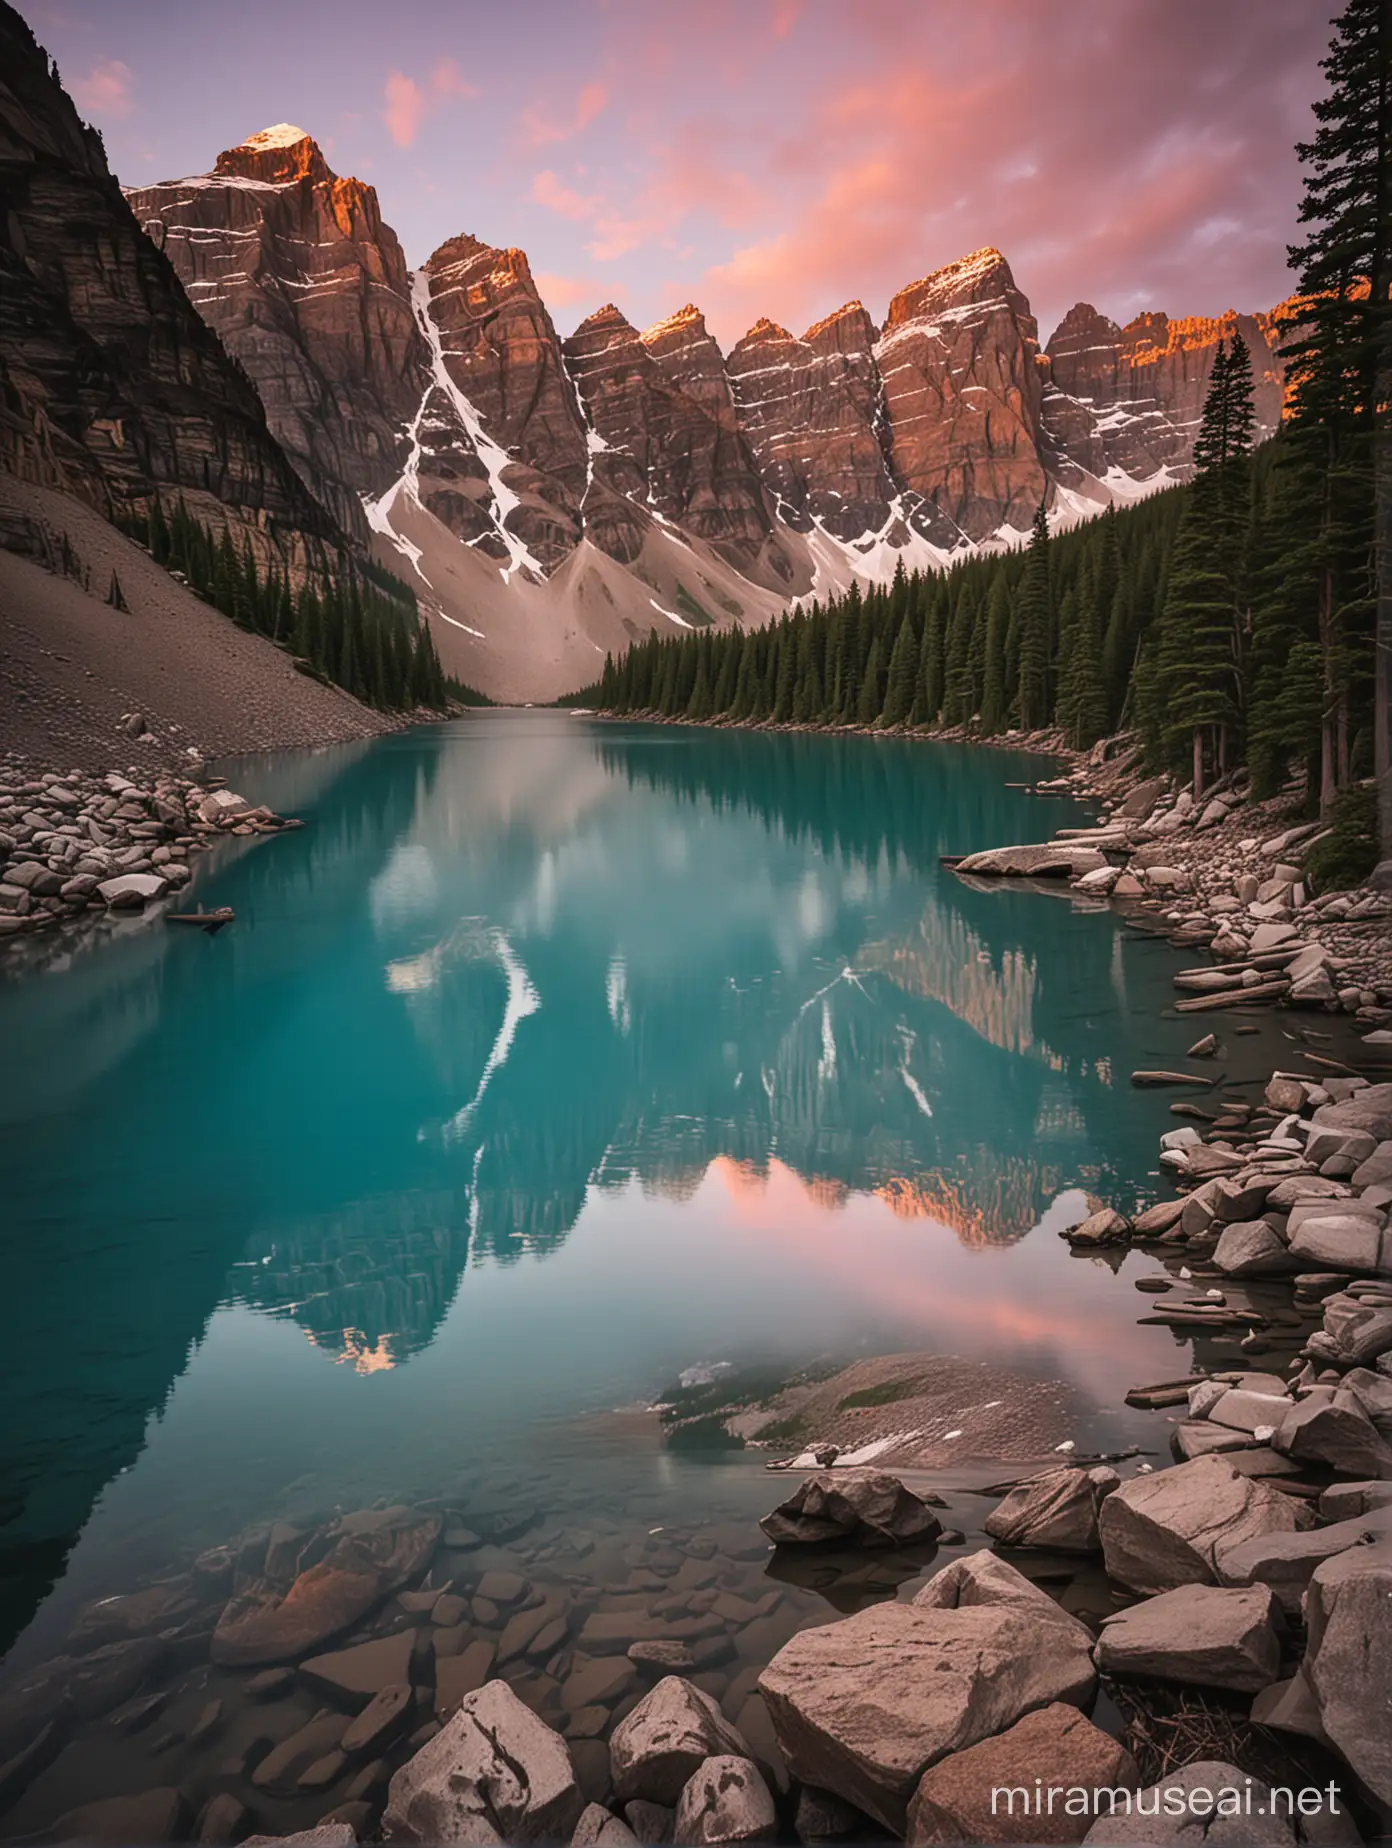 a wonderful photograph from a sunet in Moraine Lake, serne feelings, nostalgic vibes, wonderful colors